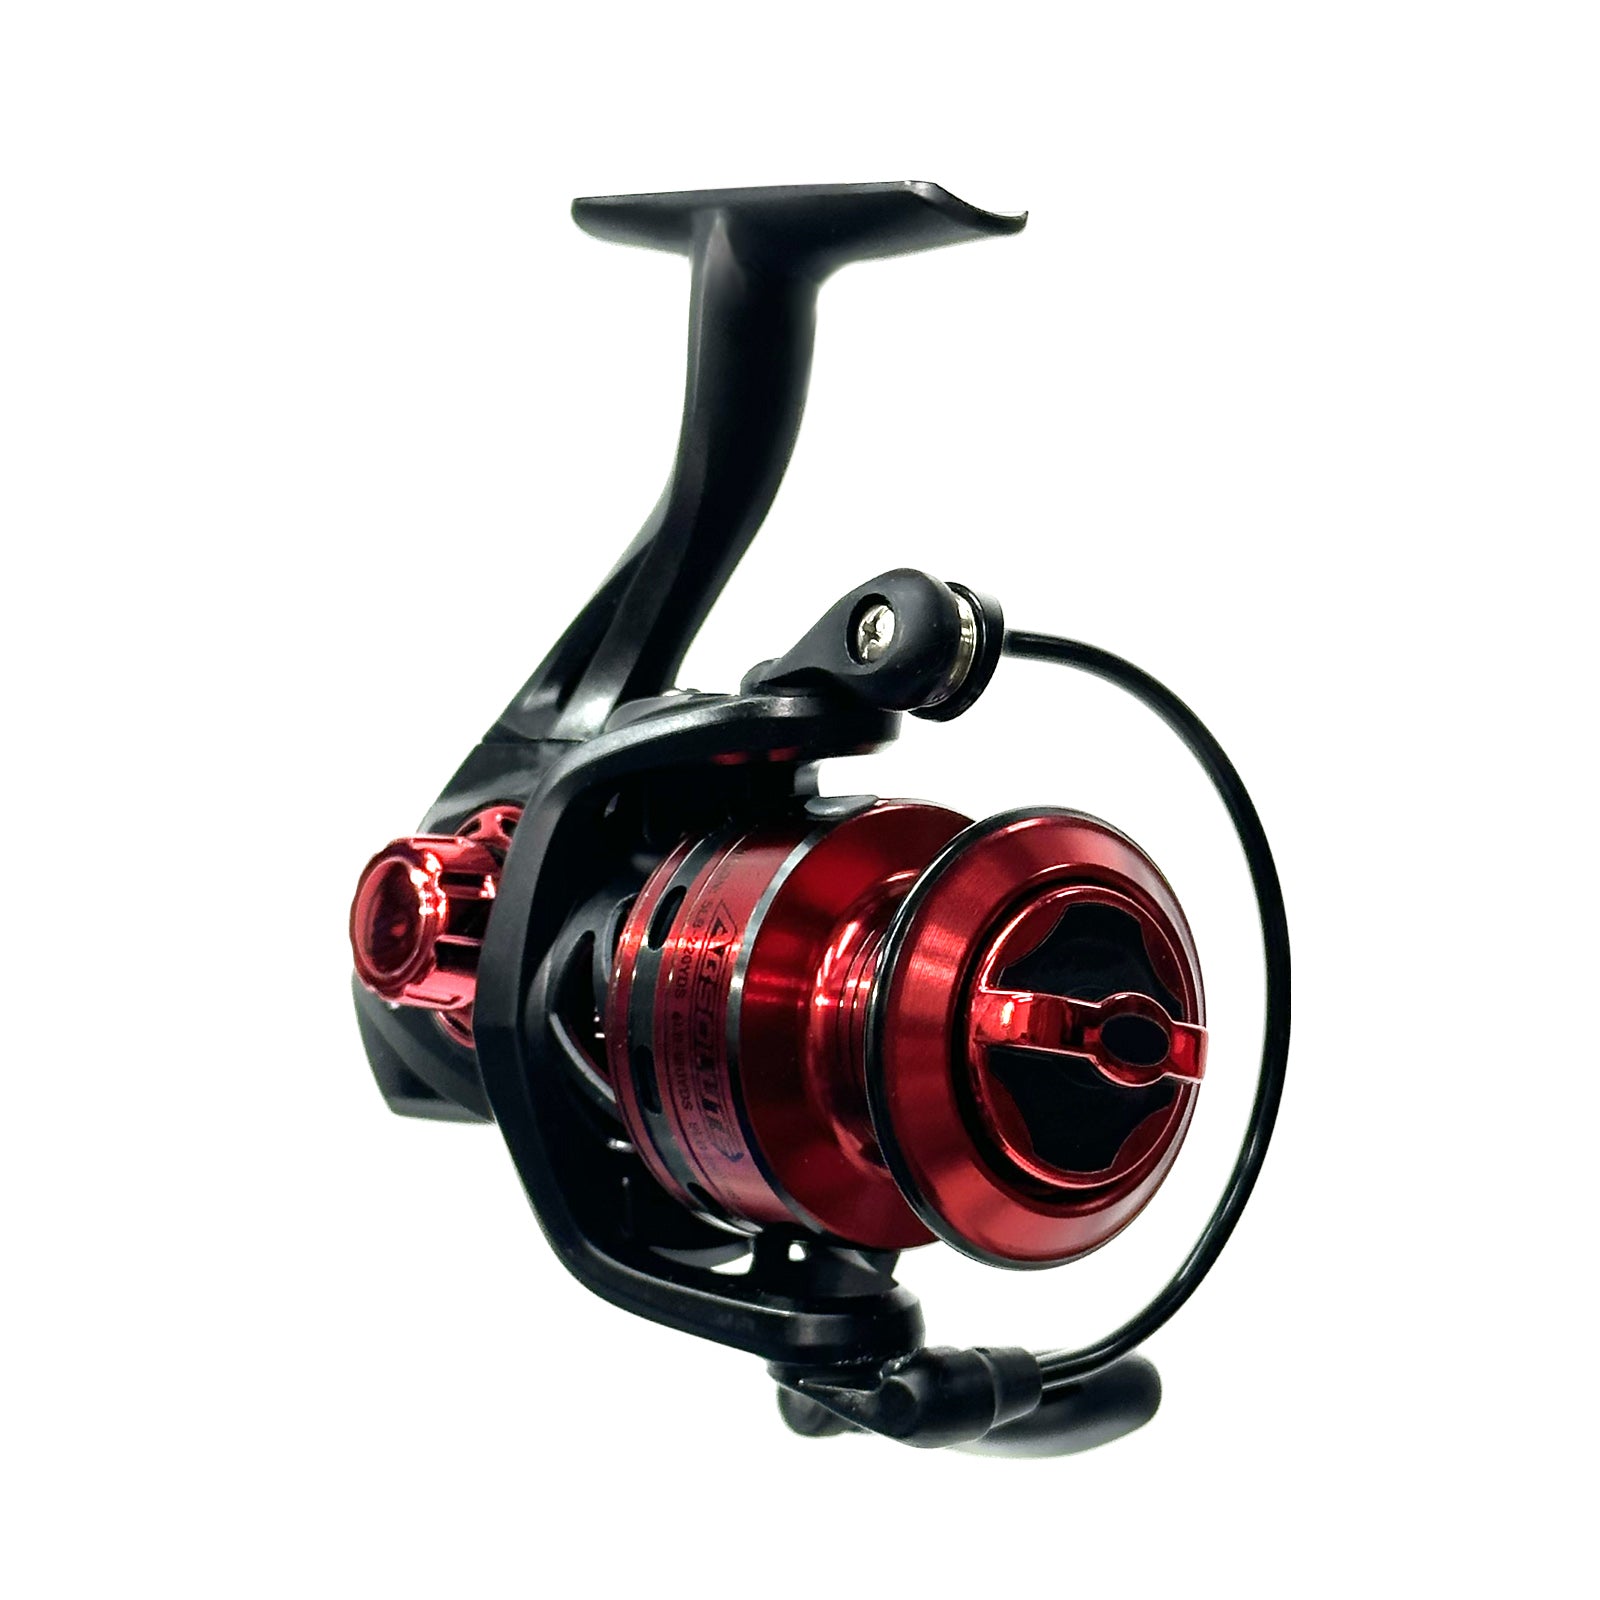 https://op2.0ps.us/original/opplanet-favorite-fishing-absolute-2000-spinning-reel-5-2-1-gear-ratio-4-1-bb-red-abs2000-rtl-main